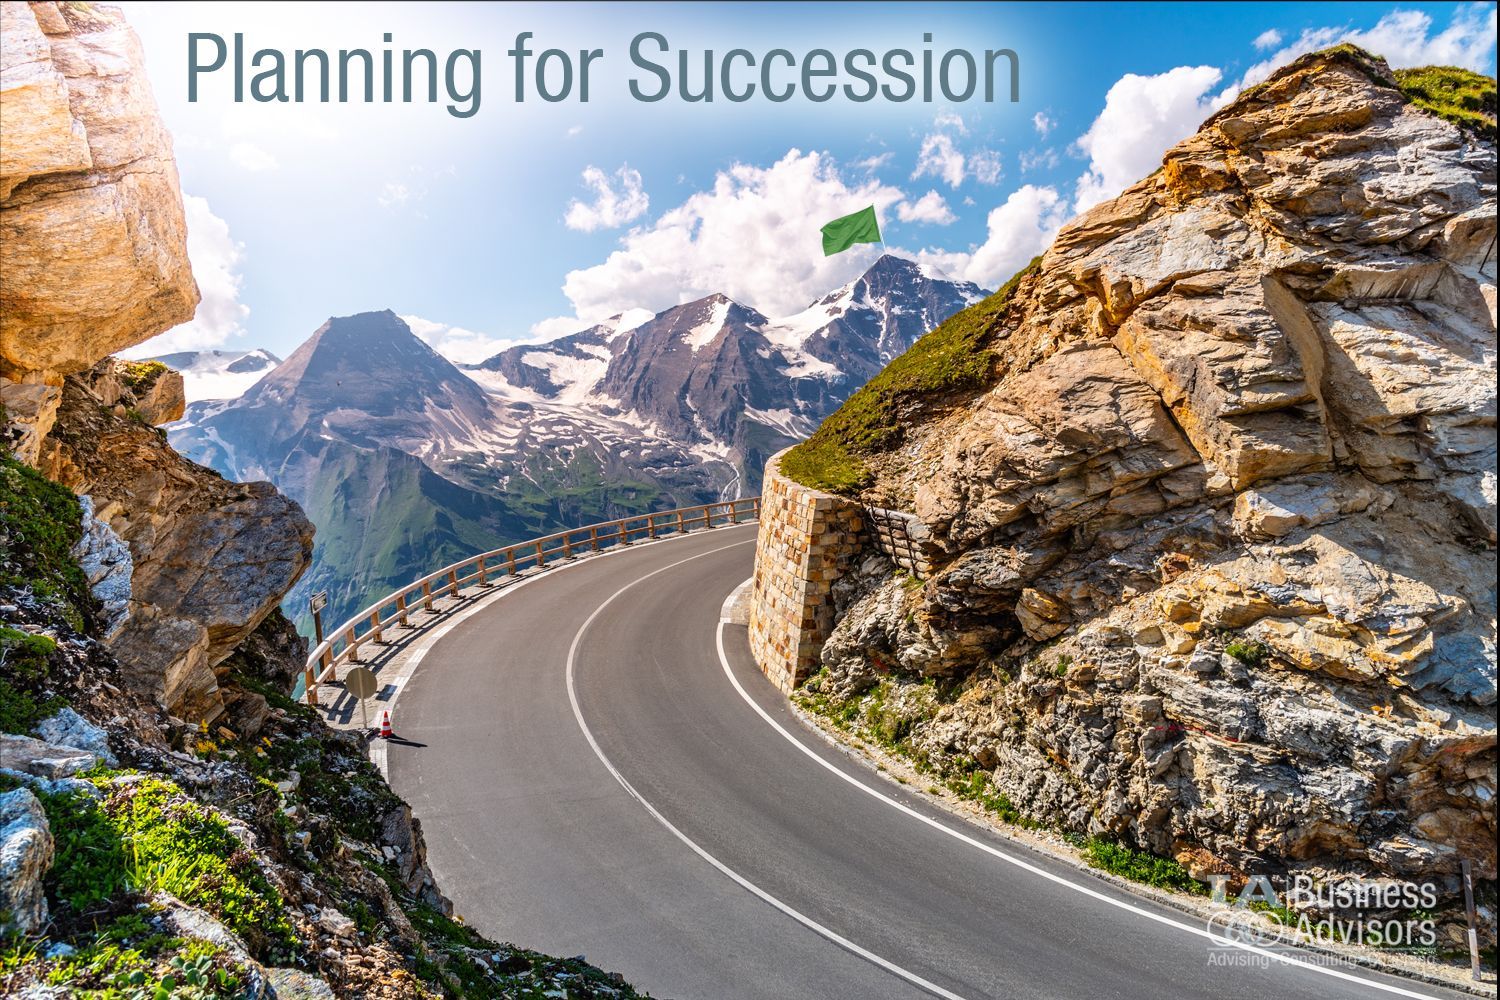 Planning for Succession